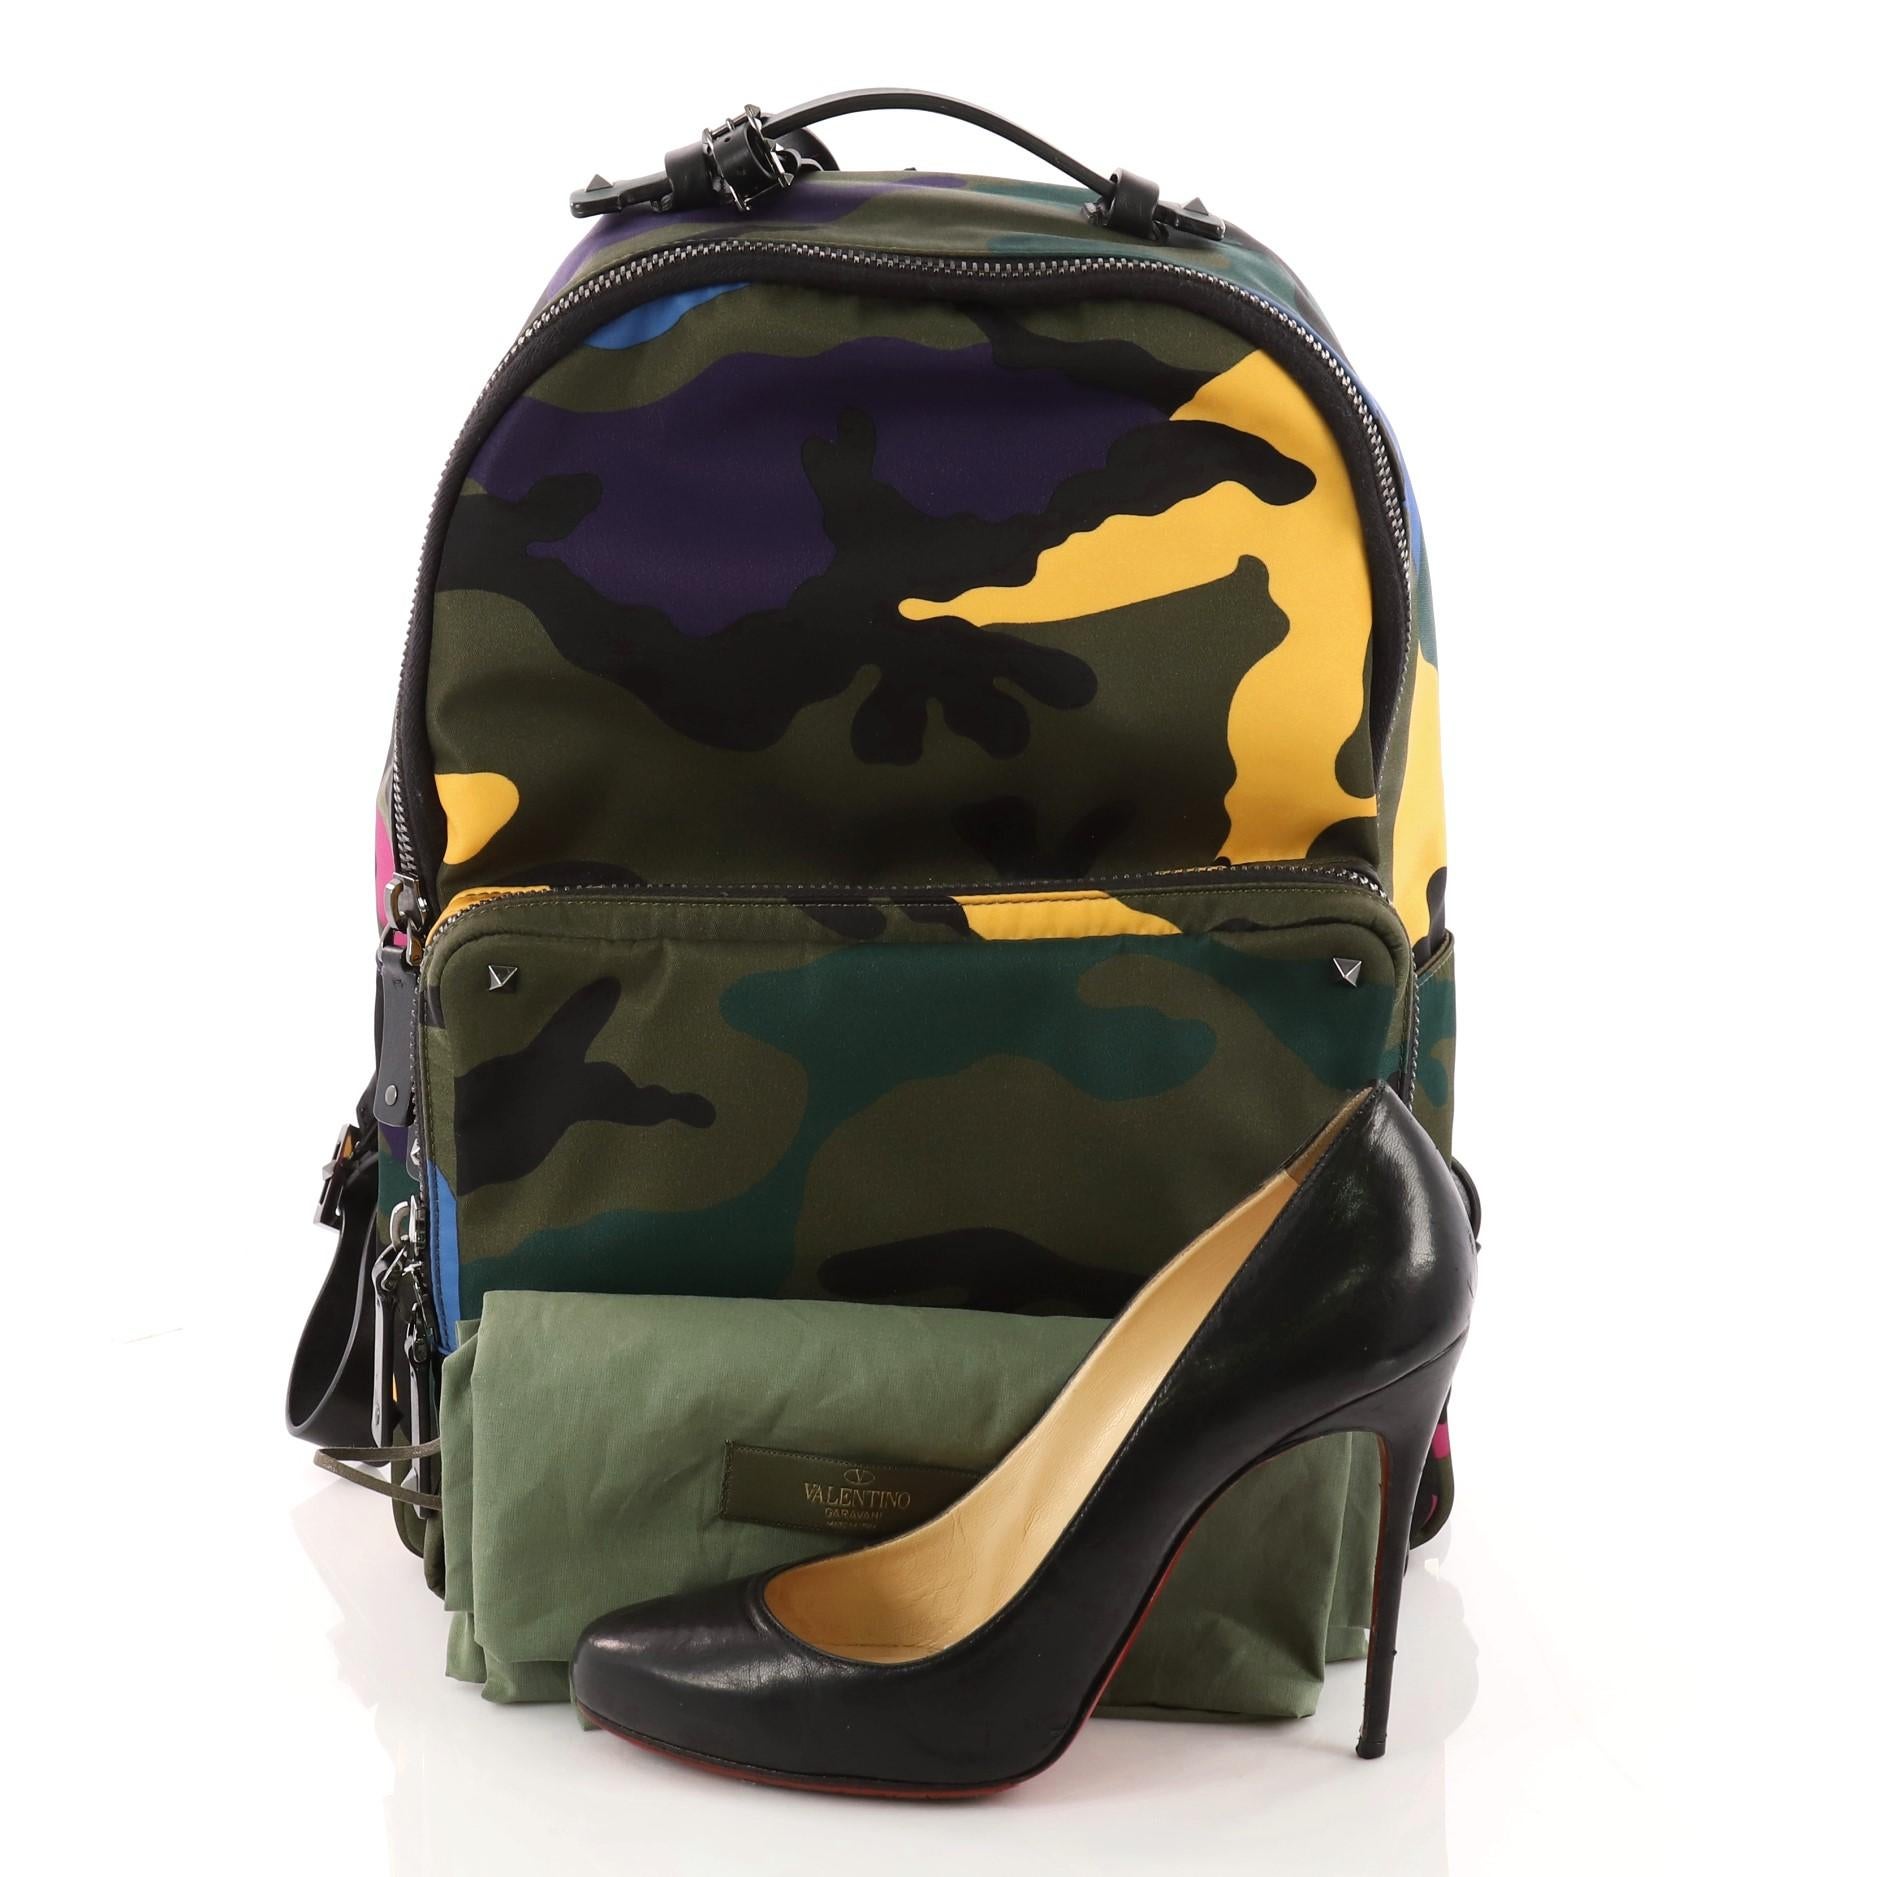 This authentic Valentino Camouflage Backpack Nylon and Leather Large is a stylish backpack perfect for on-the go moments. Crafted in green camo print nylon, this practical bag features dual shoulder straps, stud detailing, exterior front zip pocket